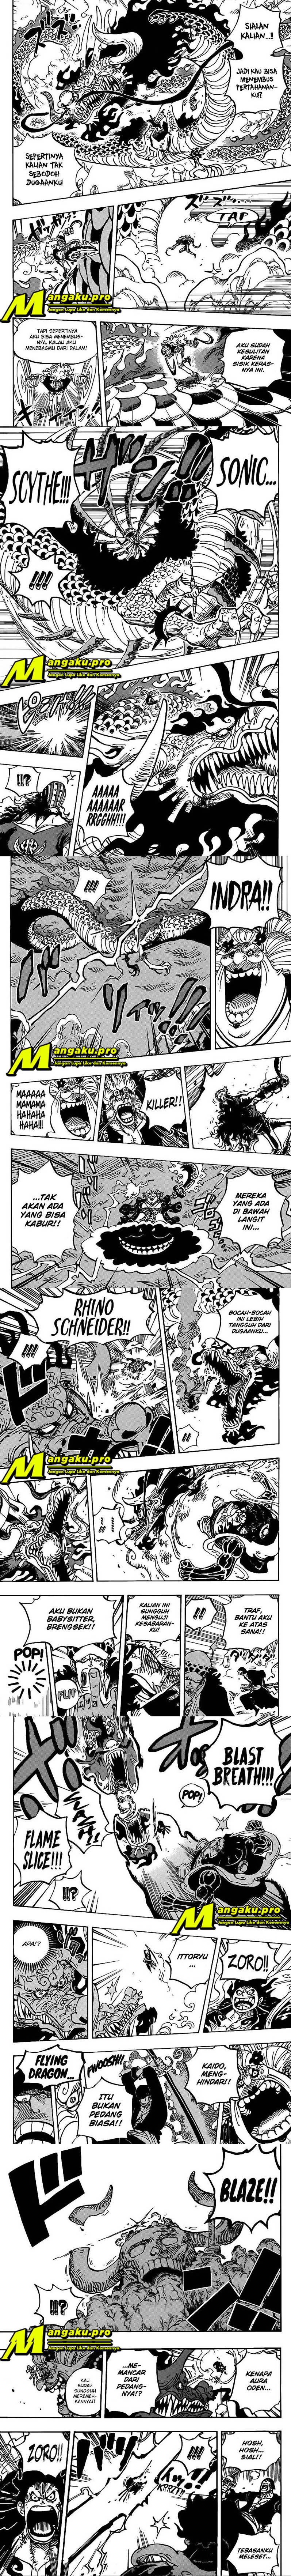 One Piece Chapter 1002 Image 2